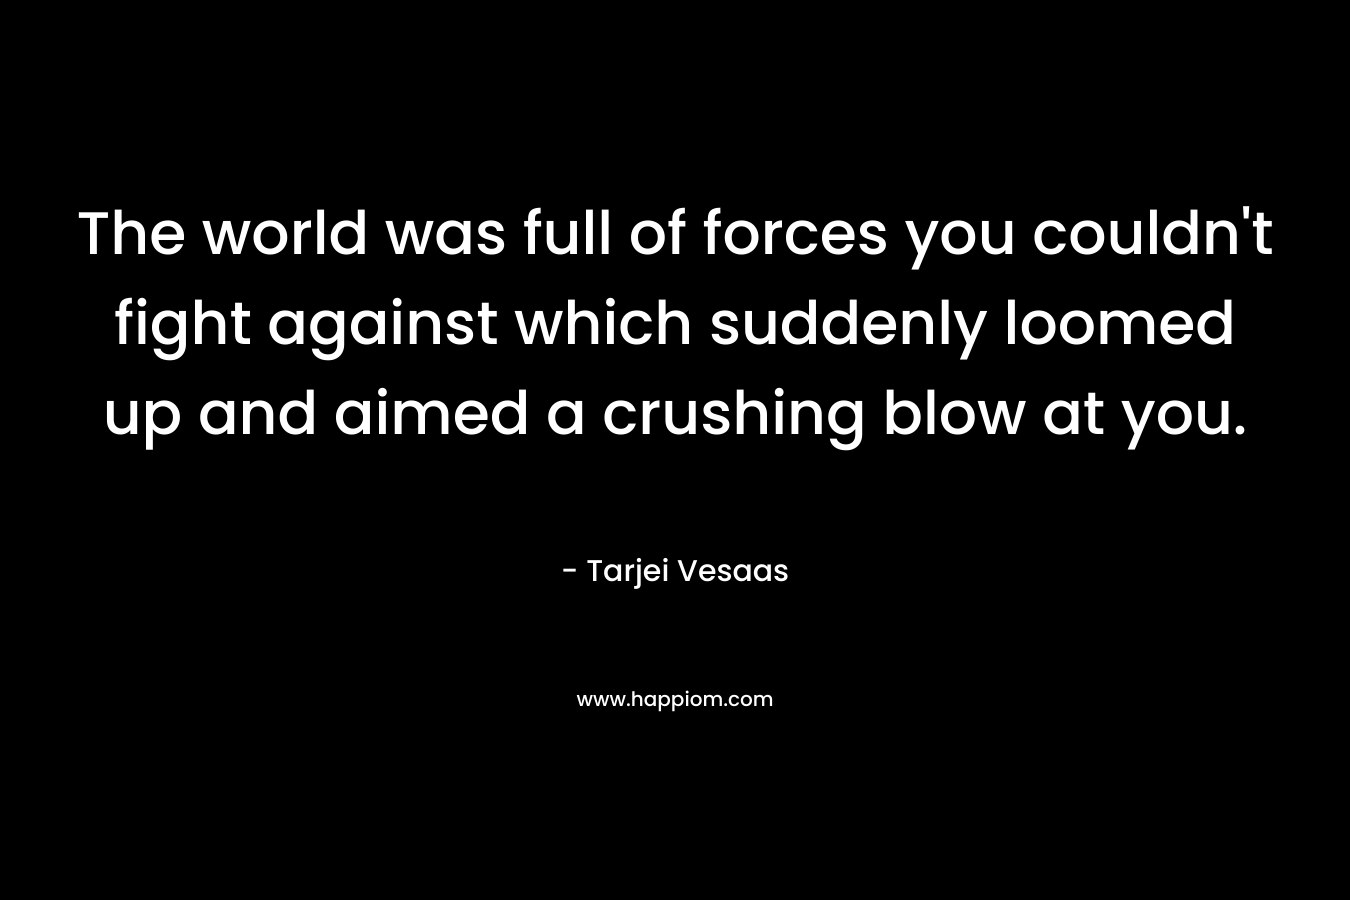 The world was full of forces you couldn't fight against which suddenly loomed up and aimed a crushing blow at you.